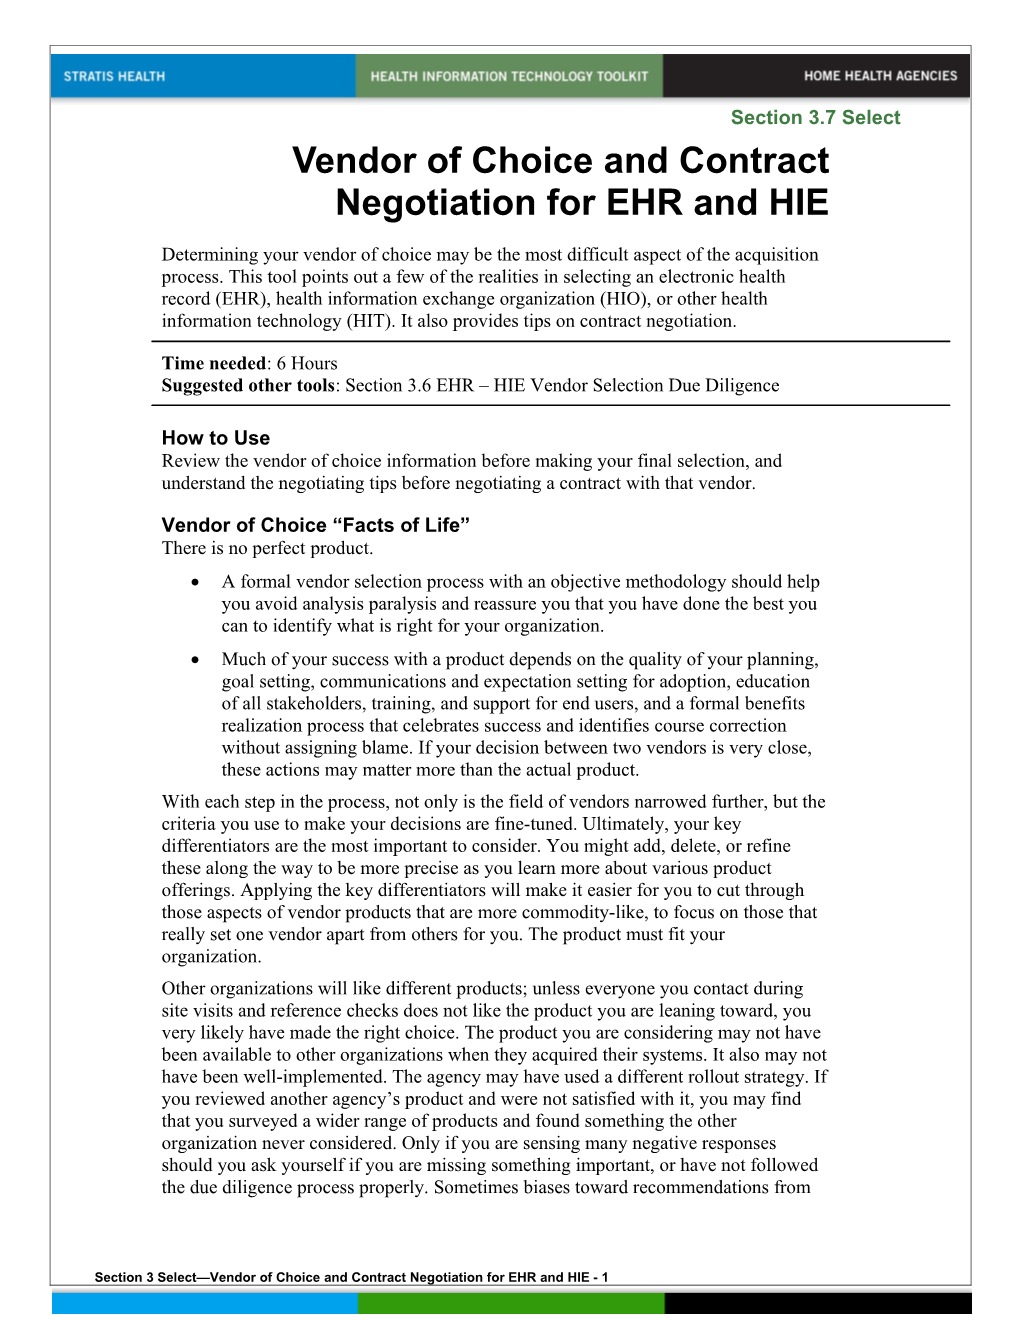 3 Vendor of Choice and Contract Negotiation for EHR and HIE